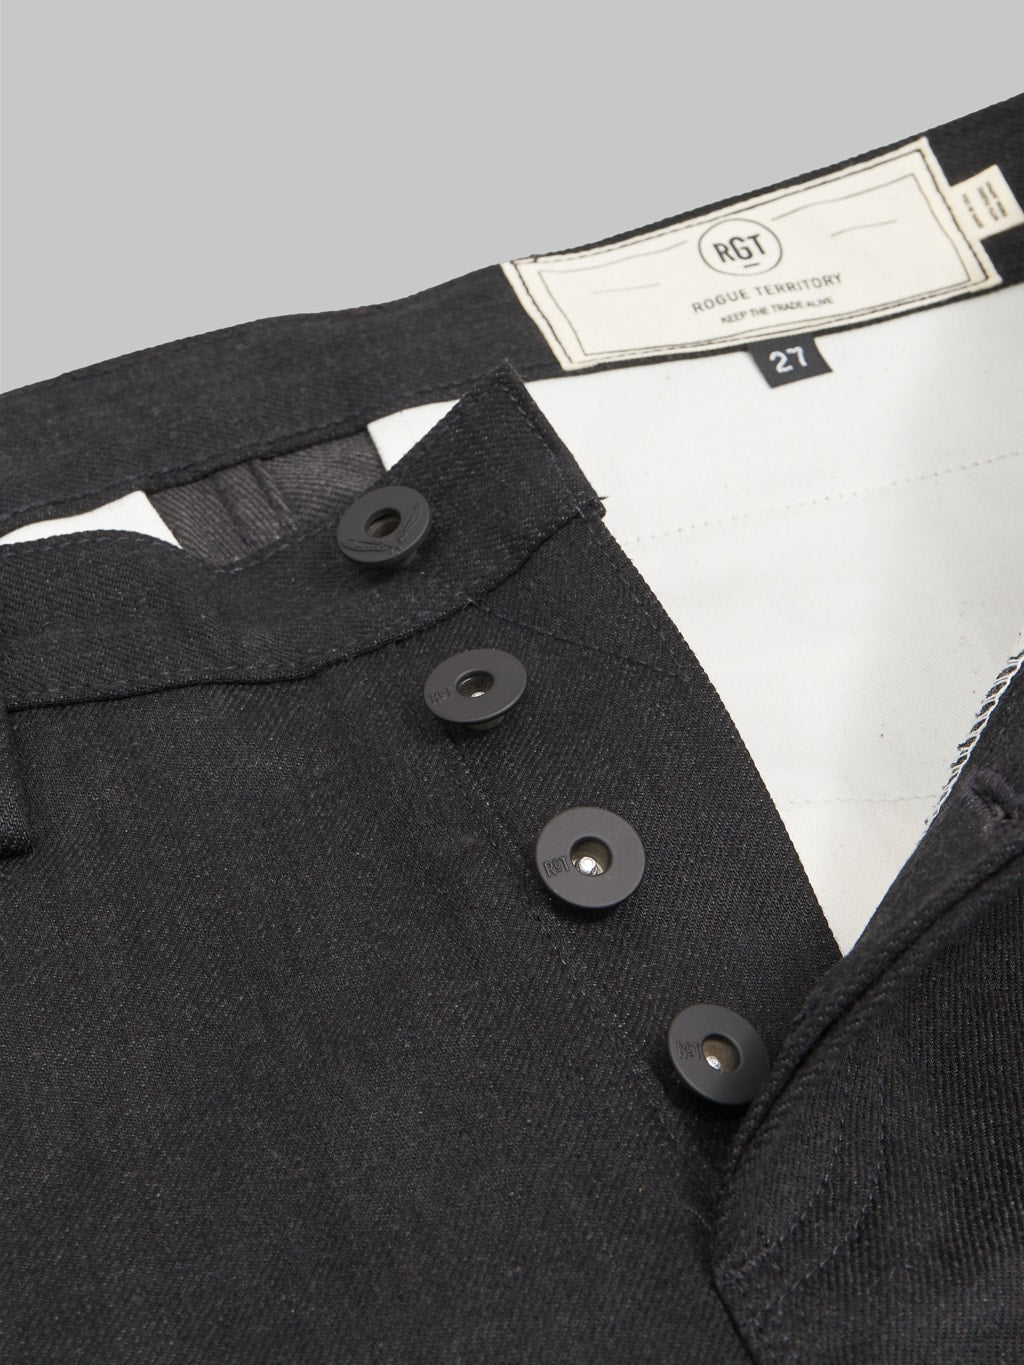 rogue territory 15oz officer trousers stealth slim tapered buttons